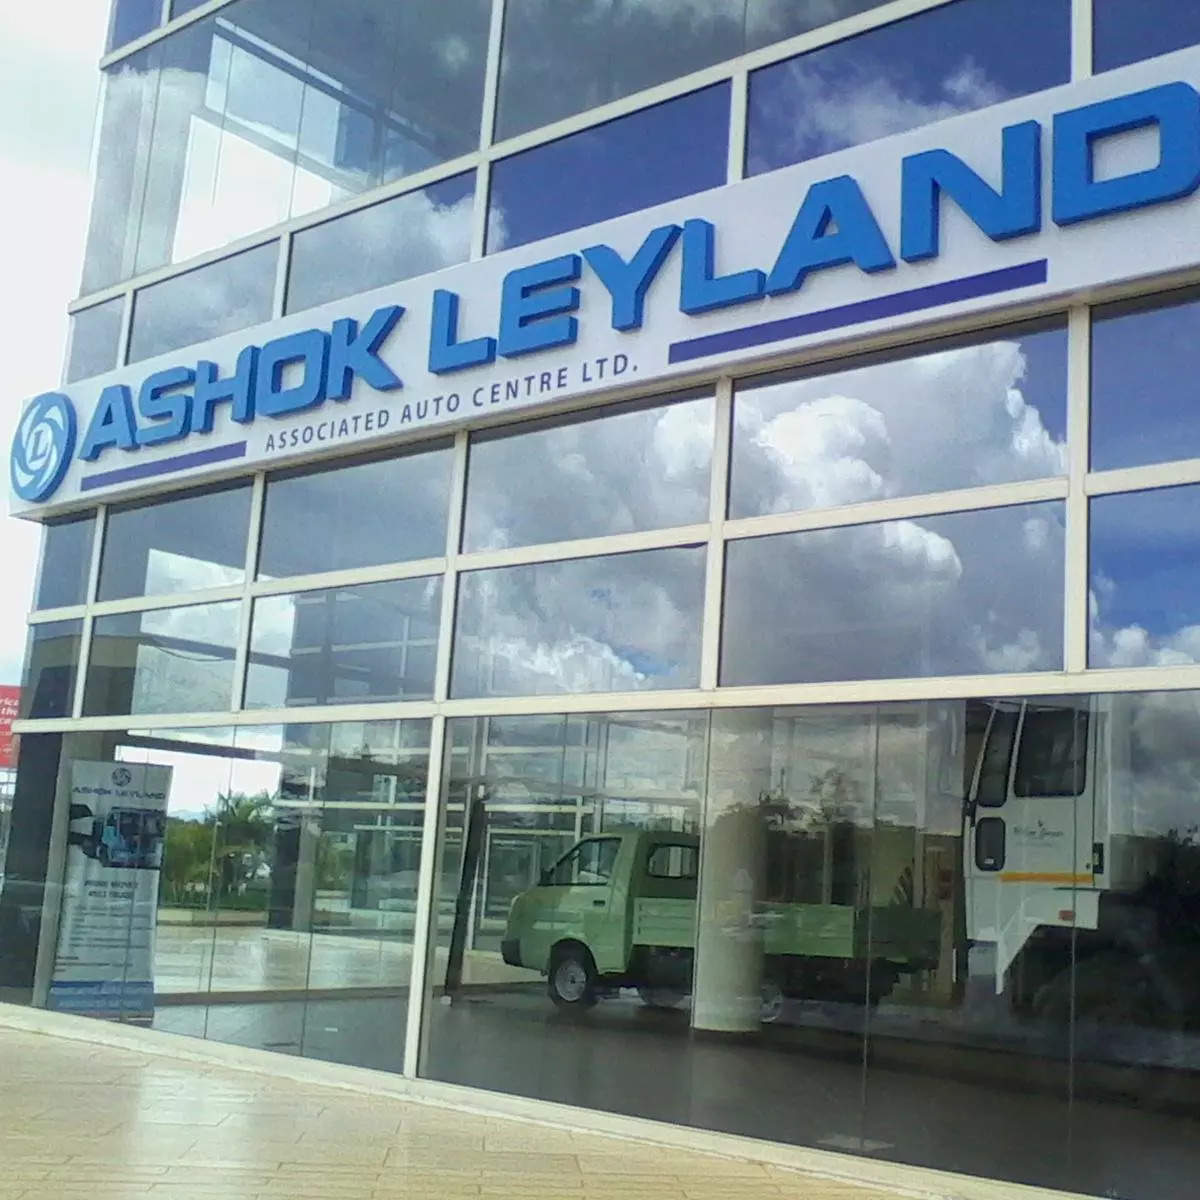 Ashok Leyland currently offers a comprehensive range of trucks and buses catering to an entire gamut of day-to-day commercial vehicle needs - from intercity light commercial vehicle to 49-tonne long-haul trucks and wide range of buses.